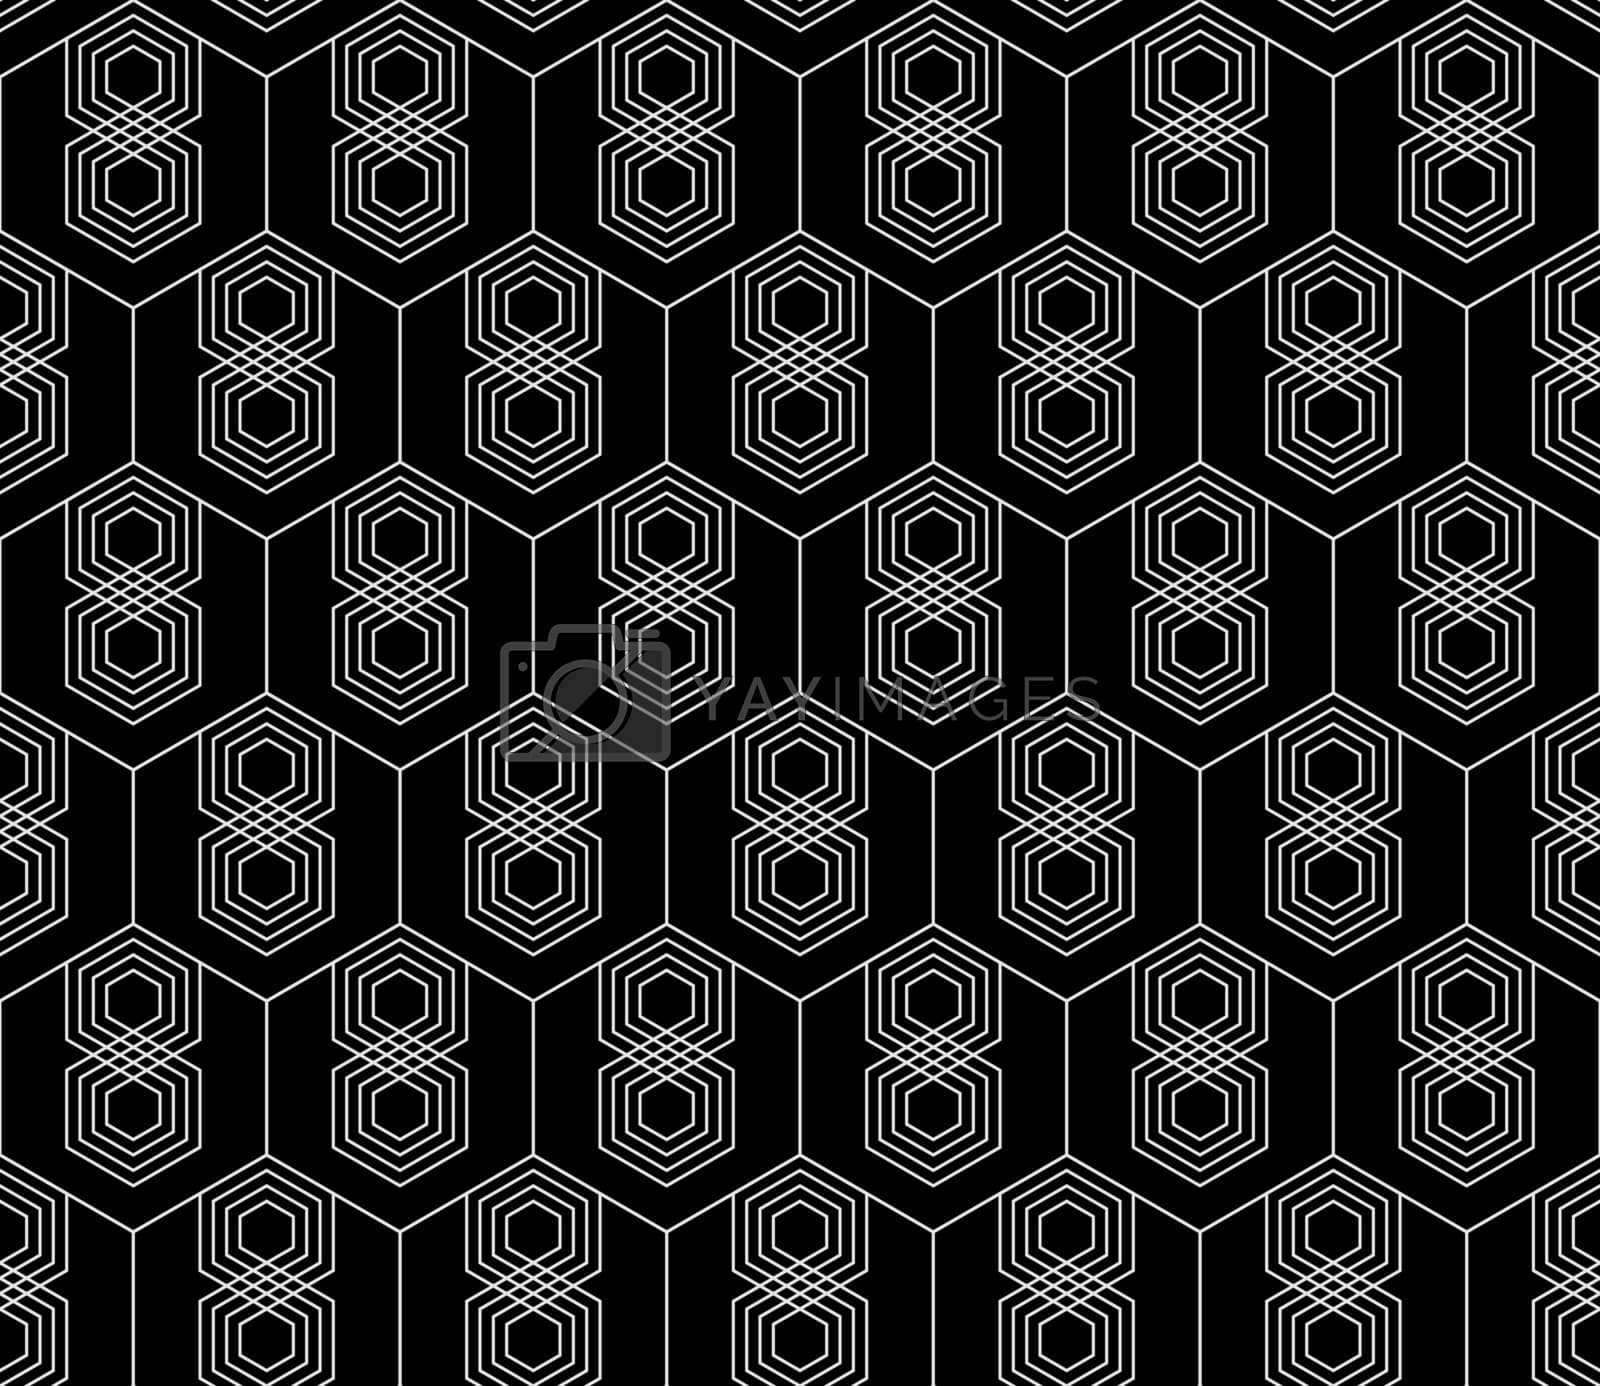 Royalty free image of Vector seamless geometric pattern. Classic Chinese ancient fully editable ornament by Softulka